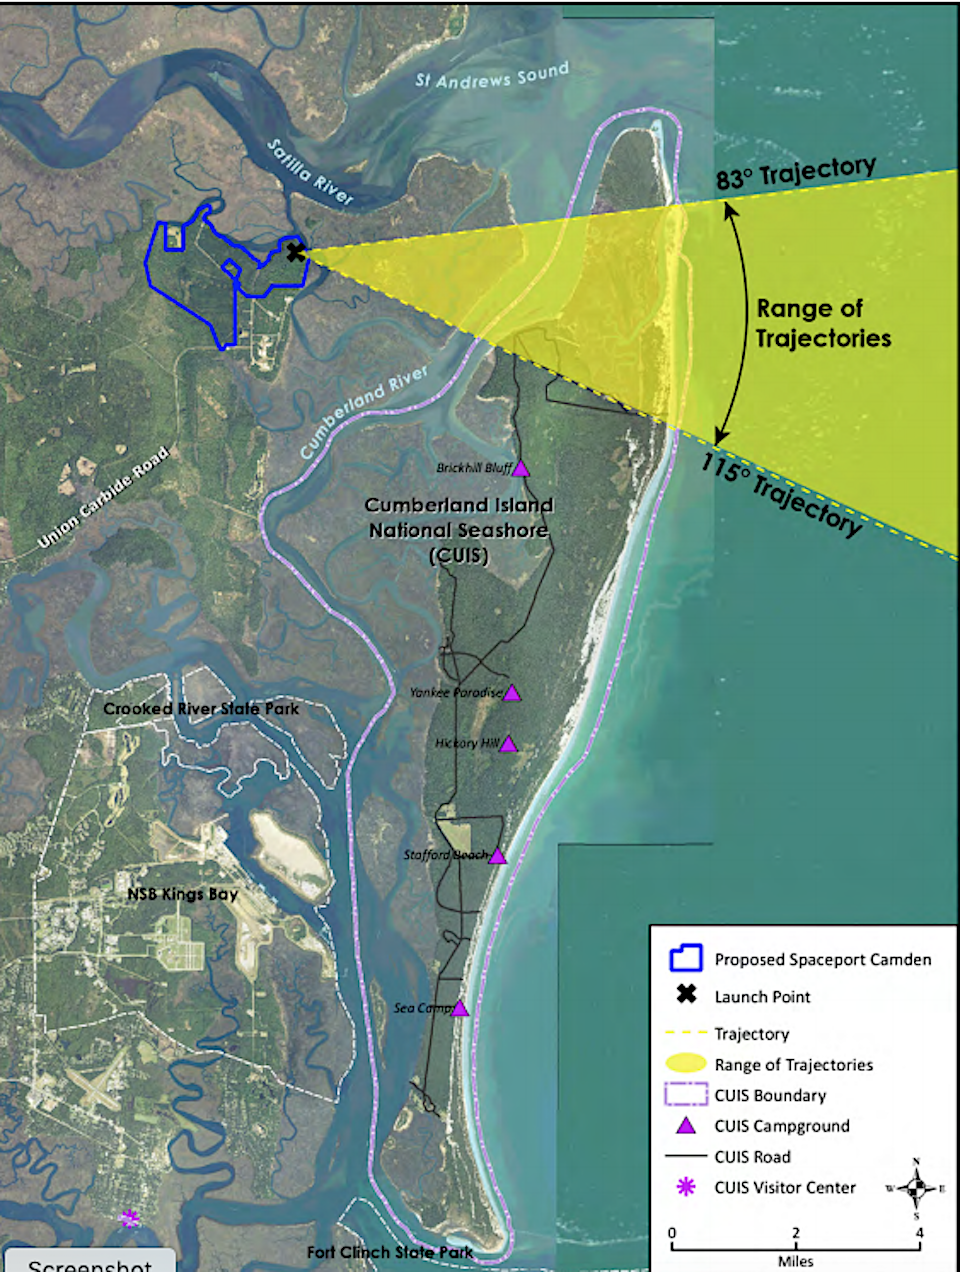 The draft EIS shows the launch trajectory cone that would take rockets over the northern half of the national seashore and Little Cumberland Island/FAA